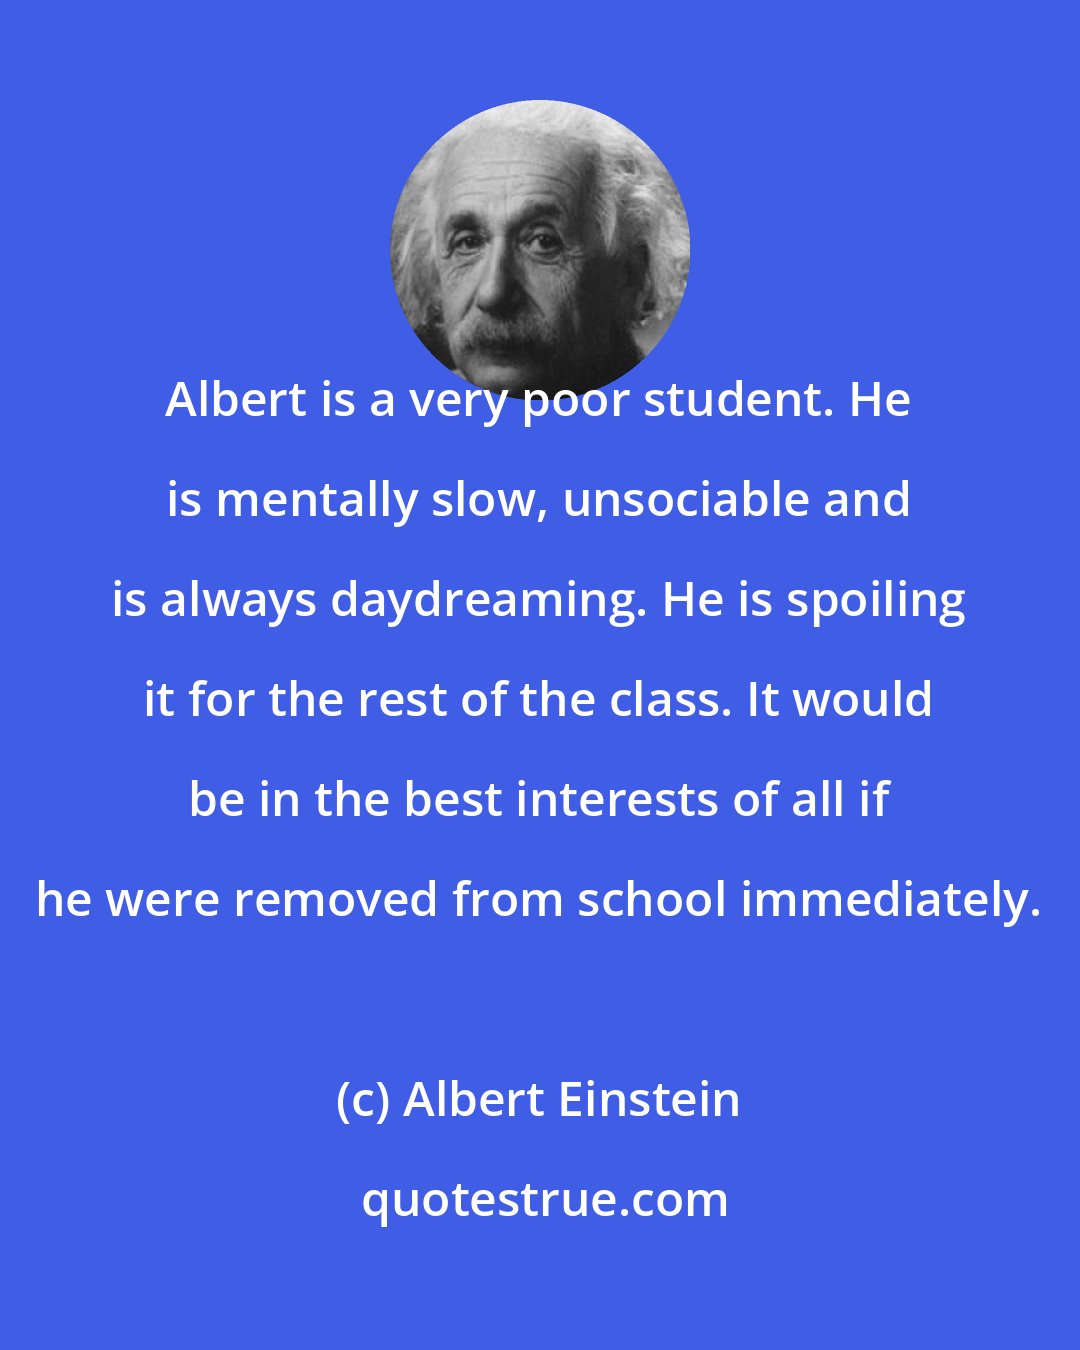 Albert Einstein: Albert is a very poor student. He is mentally slow, unsociable and is always daydreaming. He is spoiling it for the rest of the class. It would be in the best interests of all if he were removed from school immediately.